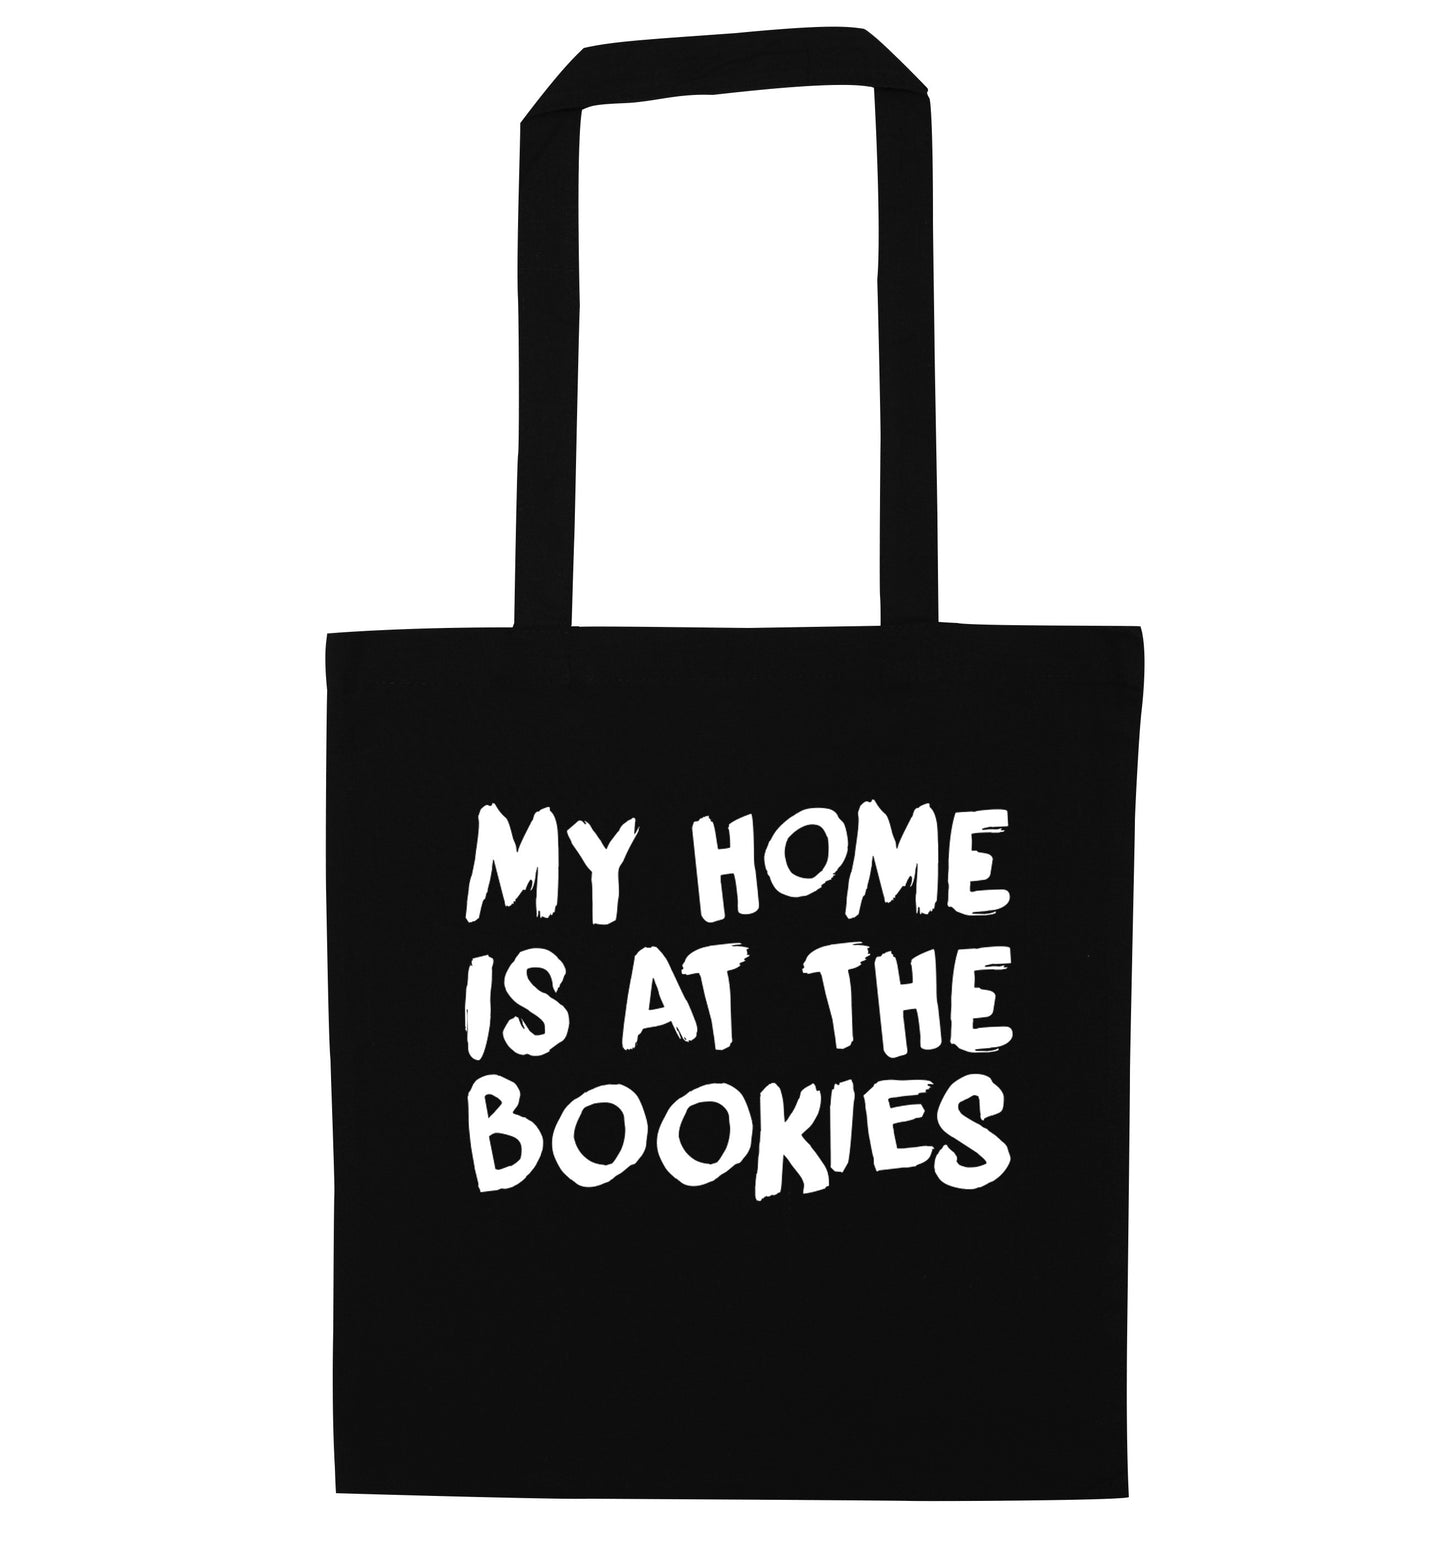 My home is at the bookies black tote bag